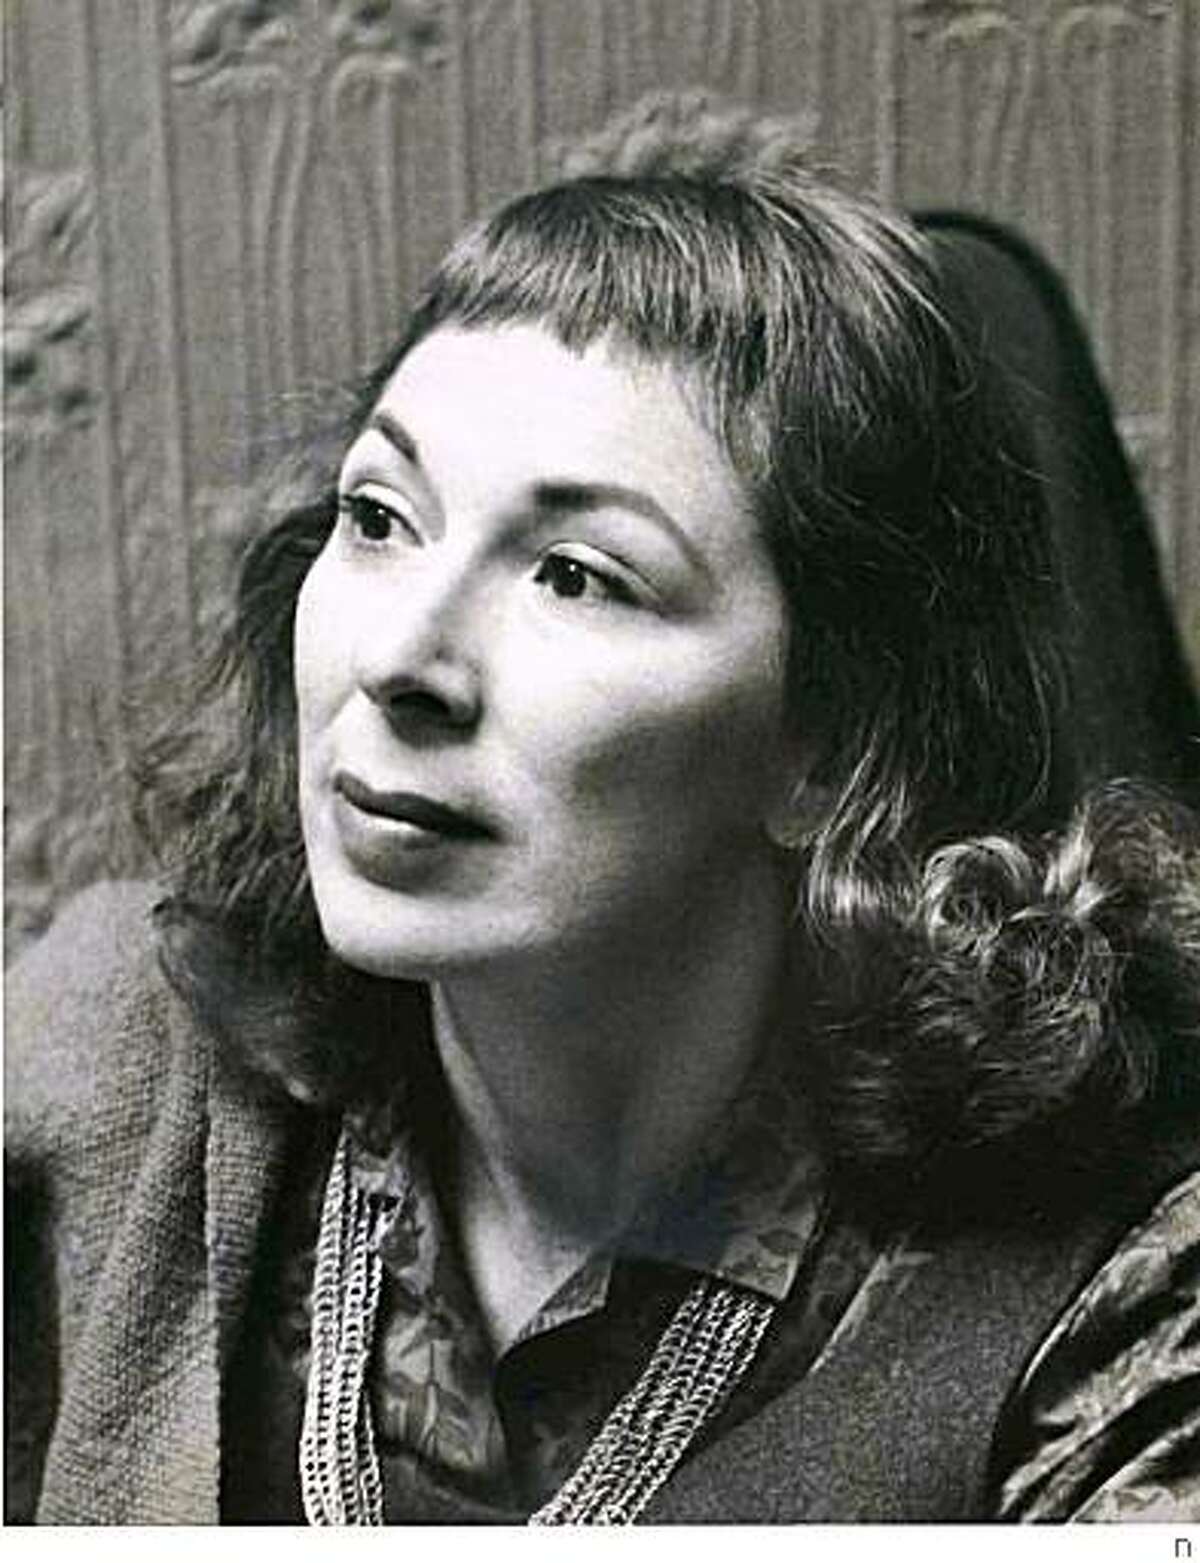 Toby Cole, an influential agent promoting theatre of social significance, credited with fostering native talents like Sam Shepard as well as contemporary European masters, and an important scholar through her widely used textbooks on acting, died on May 22, of complications after a hip fracture, at age 92 in Berkeley, California.